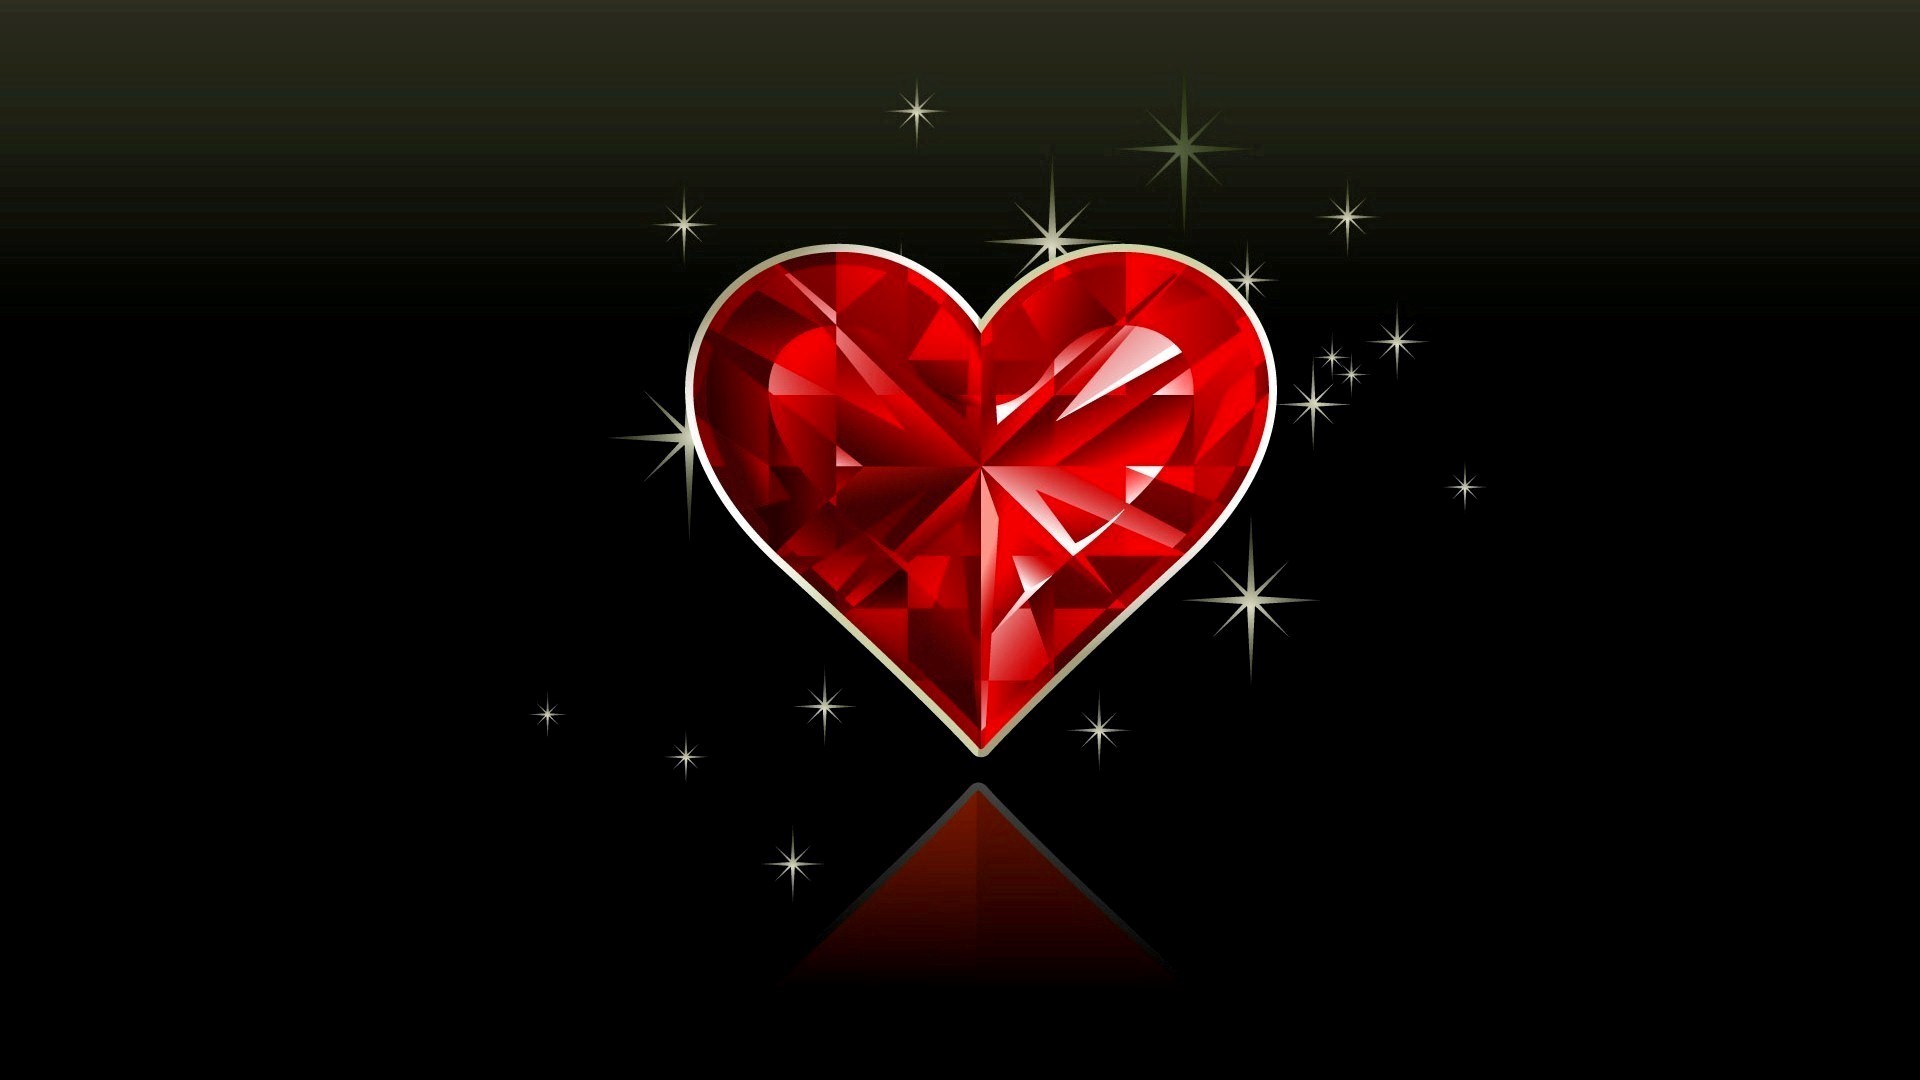 1920x1080 Love Heart Wallpapers. Previous Wallpaper Â· Red Crystal Heart in Black  Background